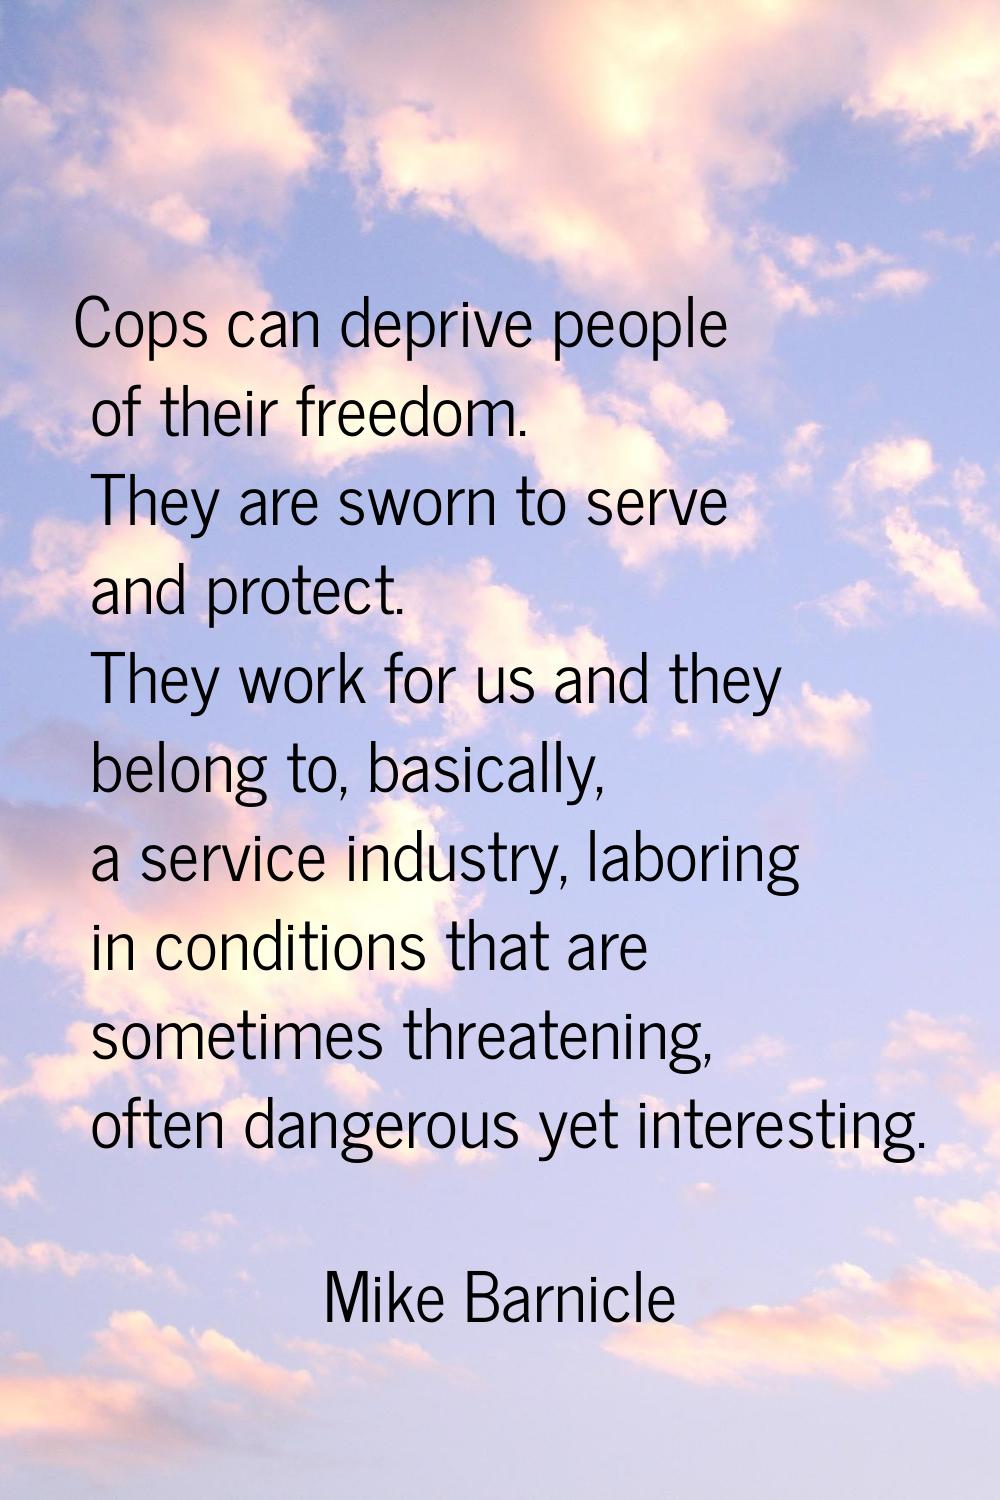 Cops can deprive people of their freedom. They are sworn to serve and protect. They work for us and